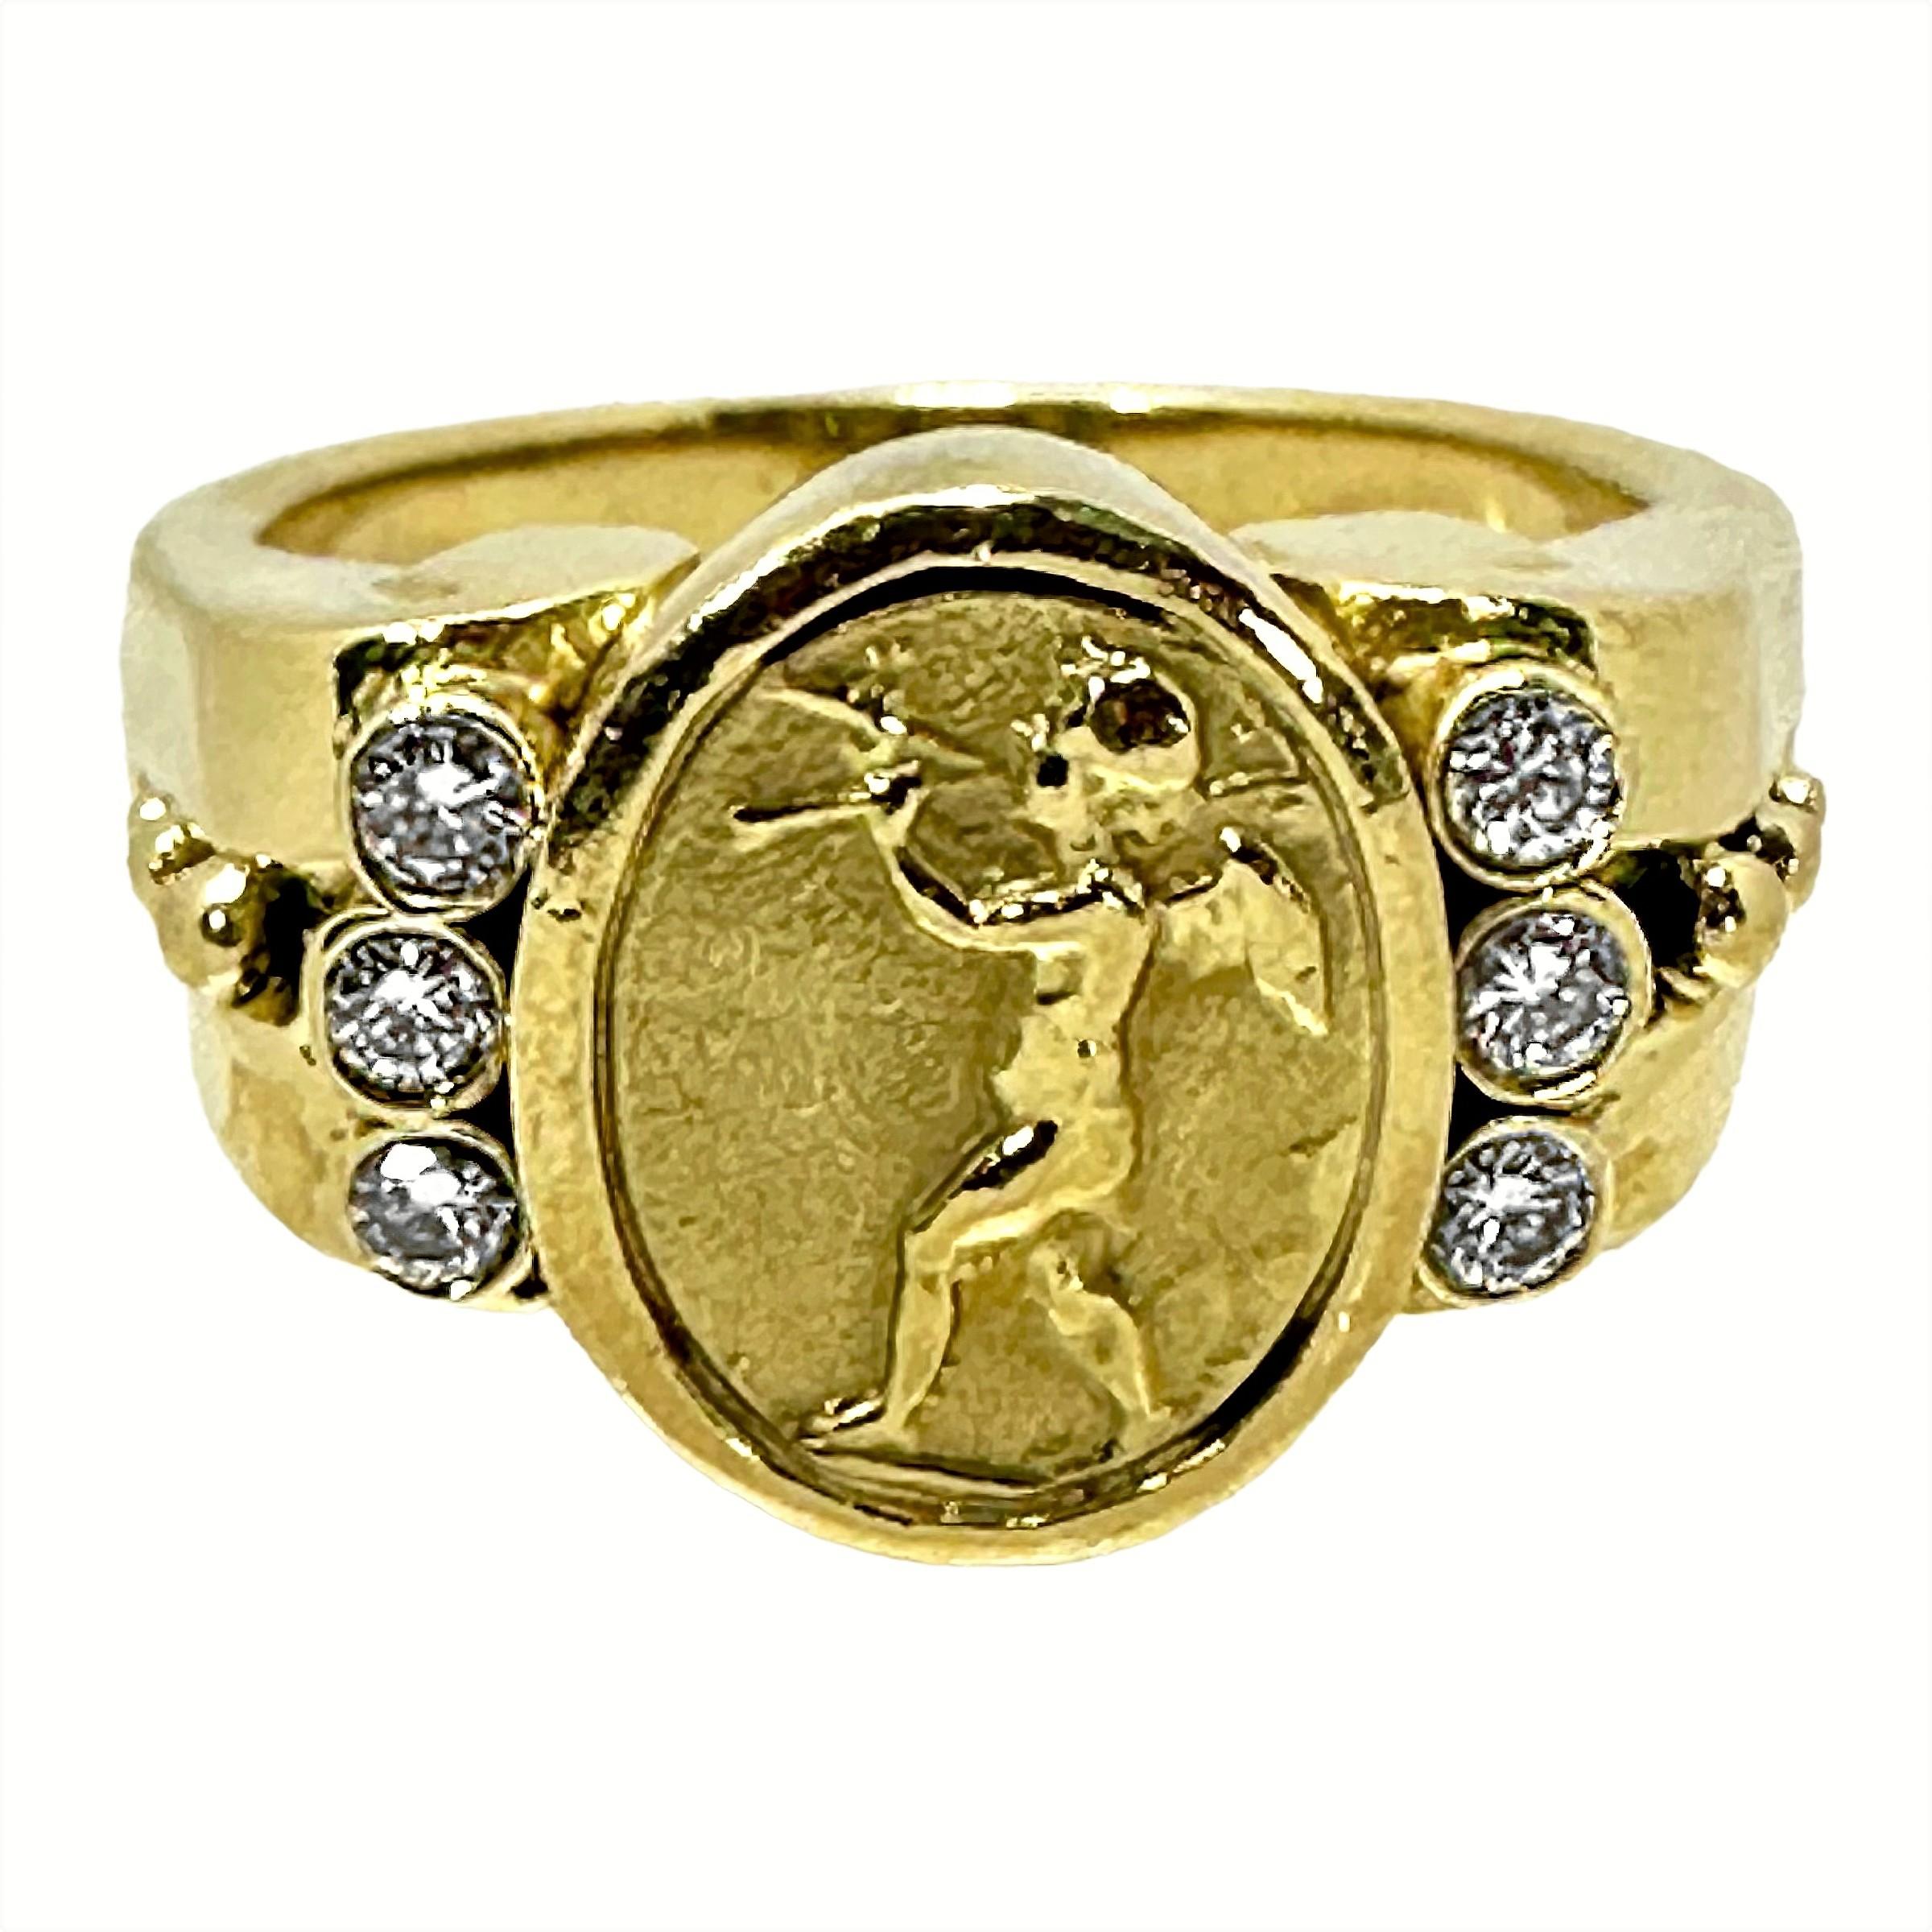 This tailored and whimsical 18K yellow gold SeidenGang designer ring features a fanciful cherub playing an ancient aulos wind instrument, in intaglio form. Flanking this central motif are six brilliant cut bezel set round brilliant cut diamonds